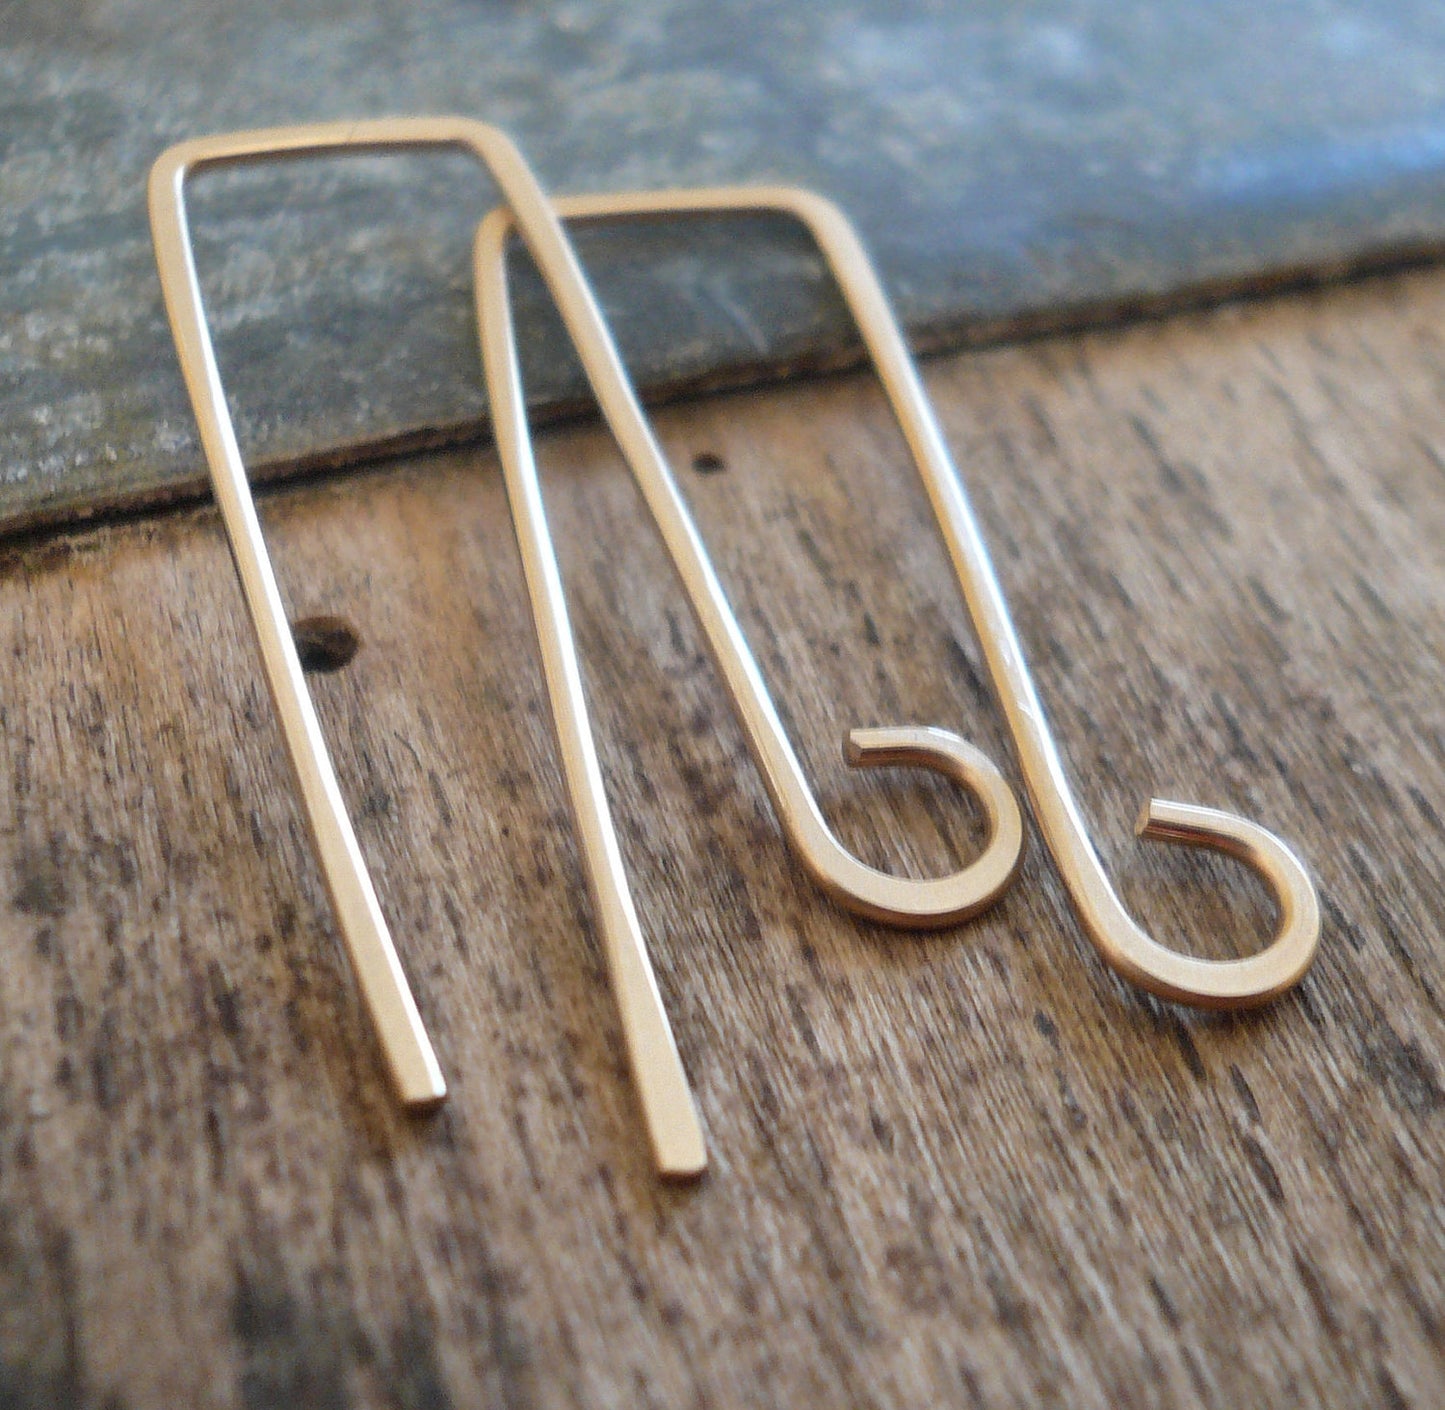 12 pairs of my Millstone 14kt Goldfill Earwires - Handmade. Handforged